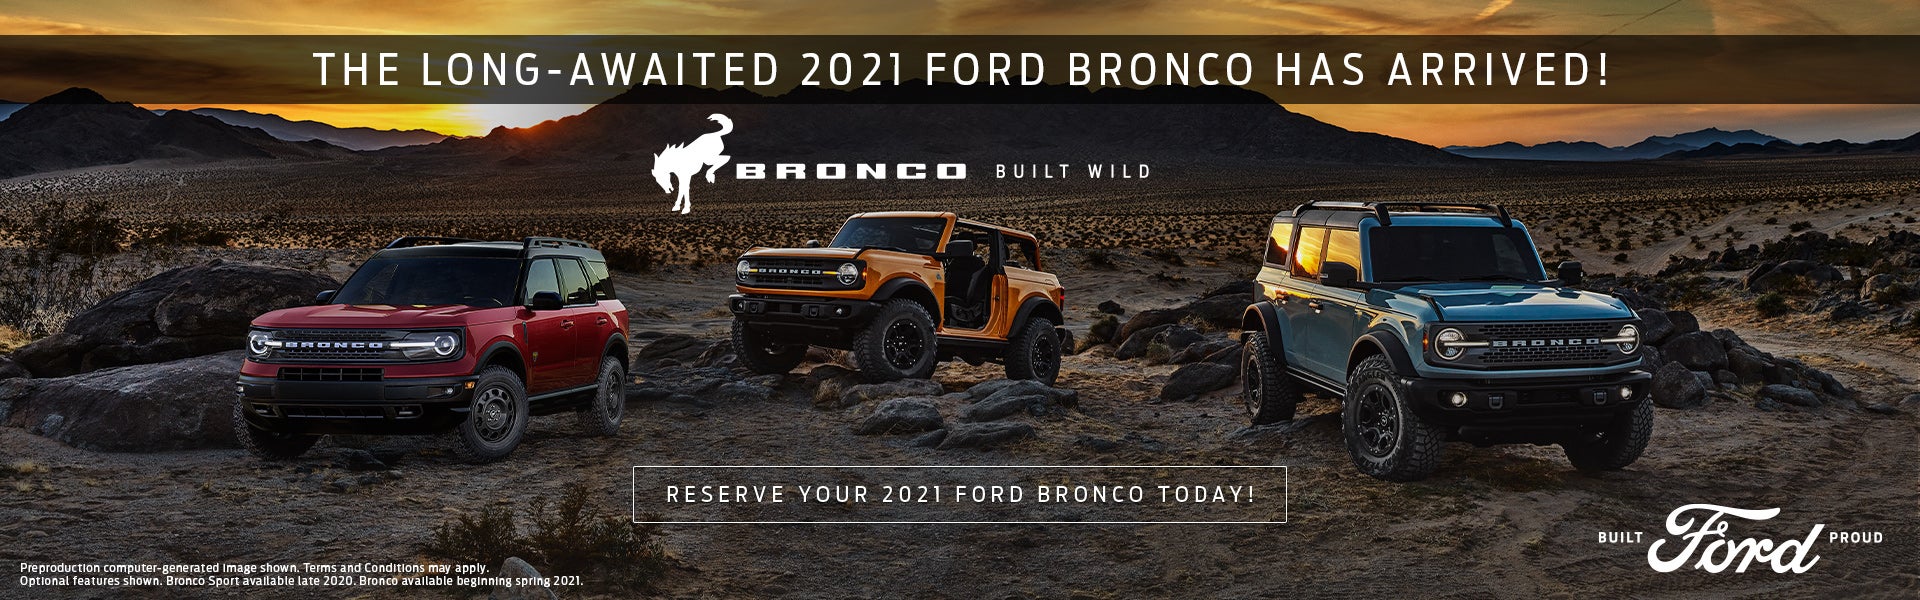 The 2021 Ford Bronco Has Arrived